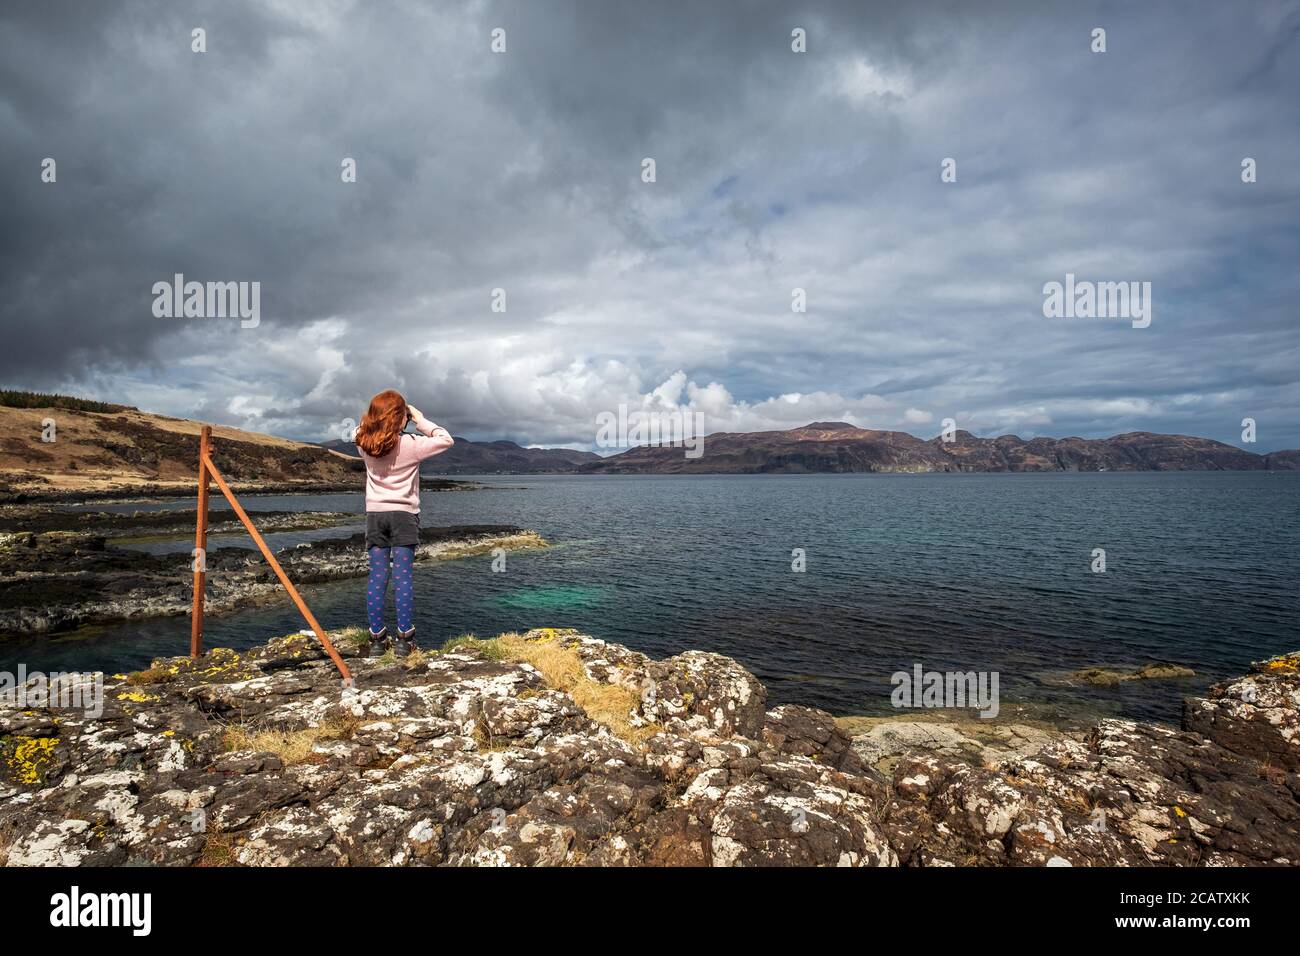 Girl with ginger hair against Scottish landscape on the Isle of Mull Stock Photo